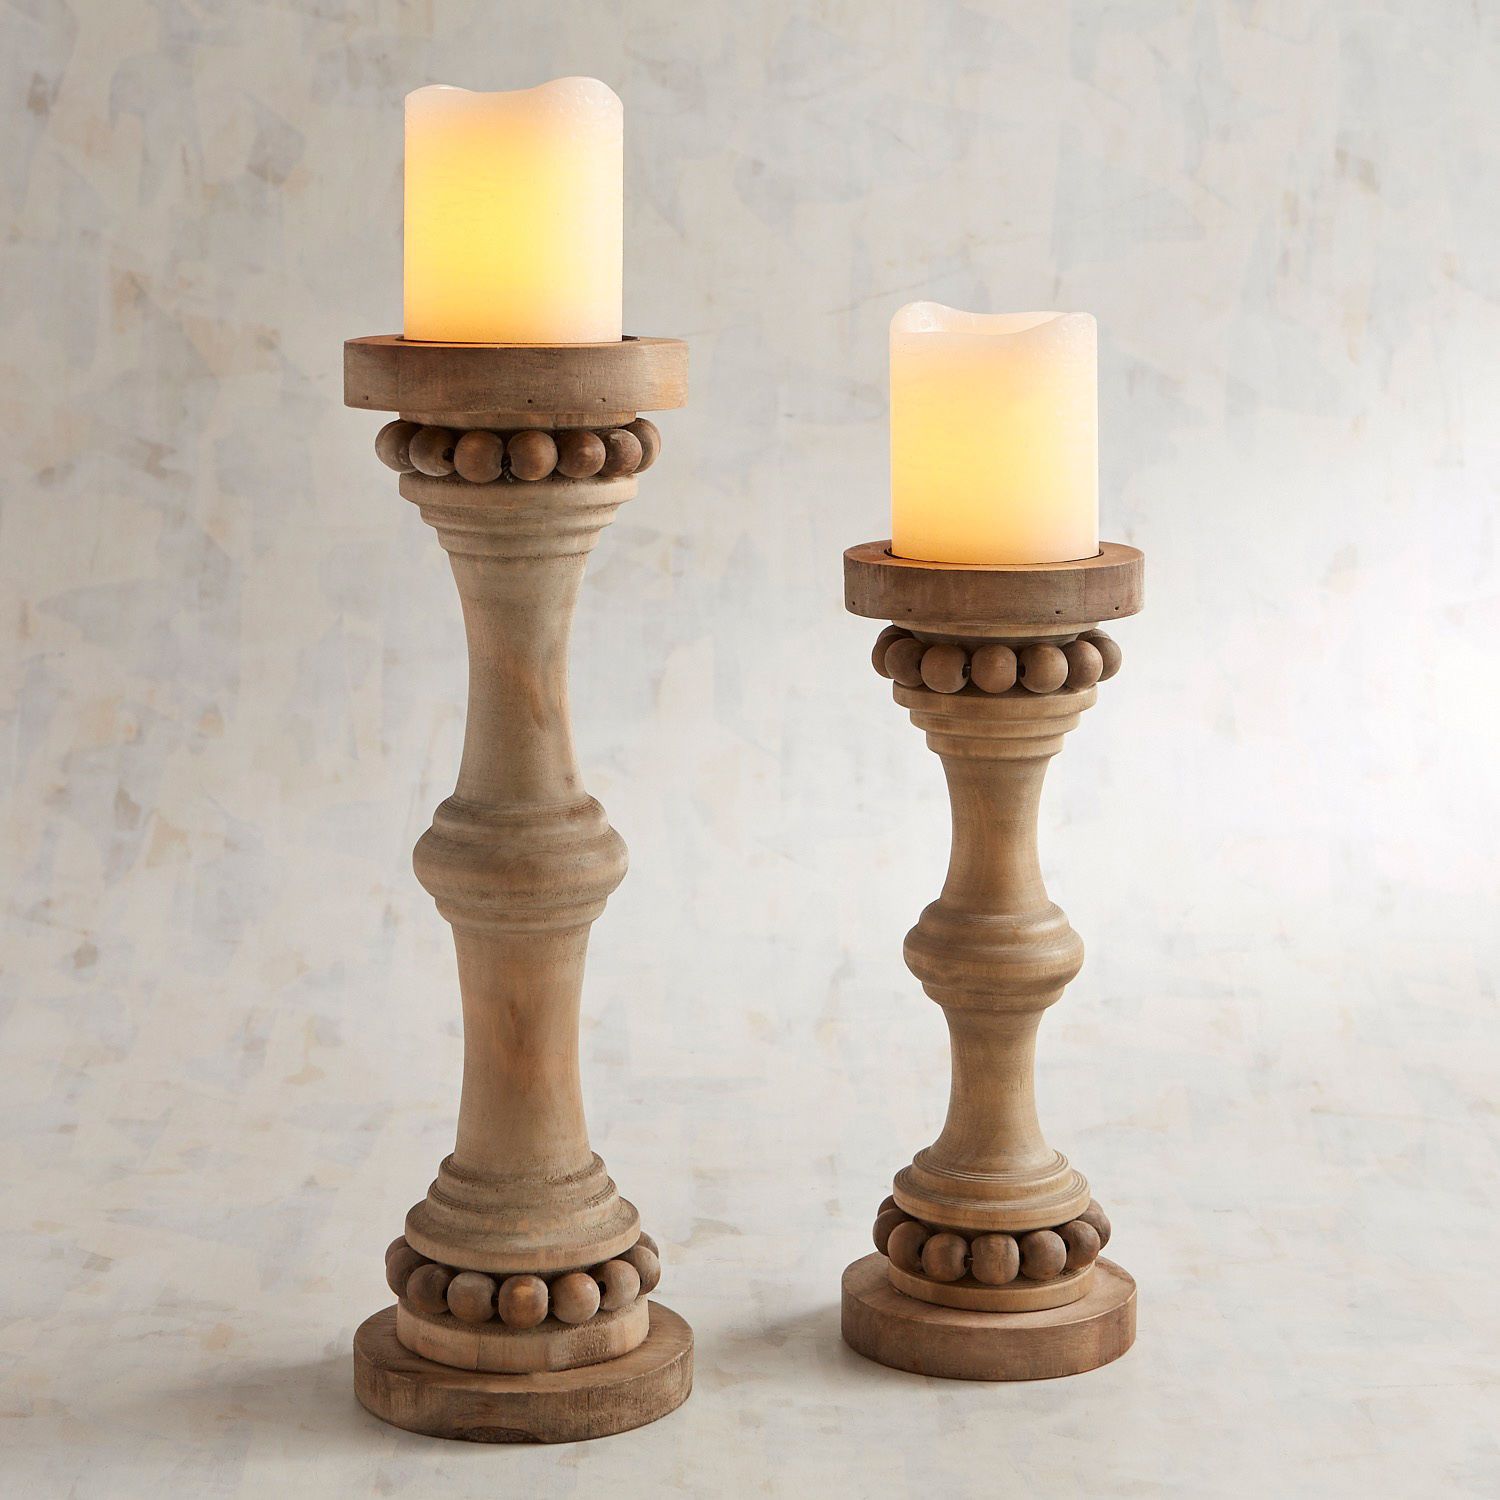 Candle Holders & Centerpieces | Pier 1 Imports